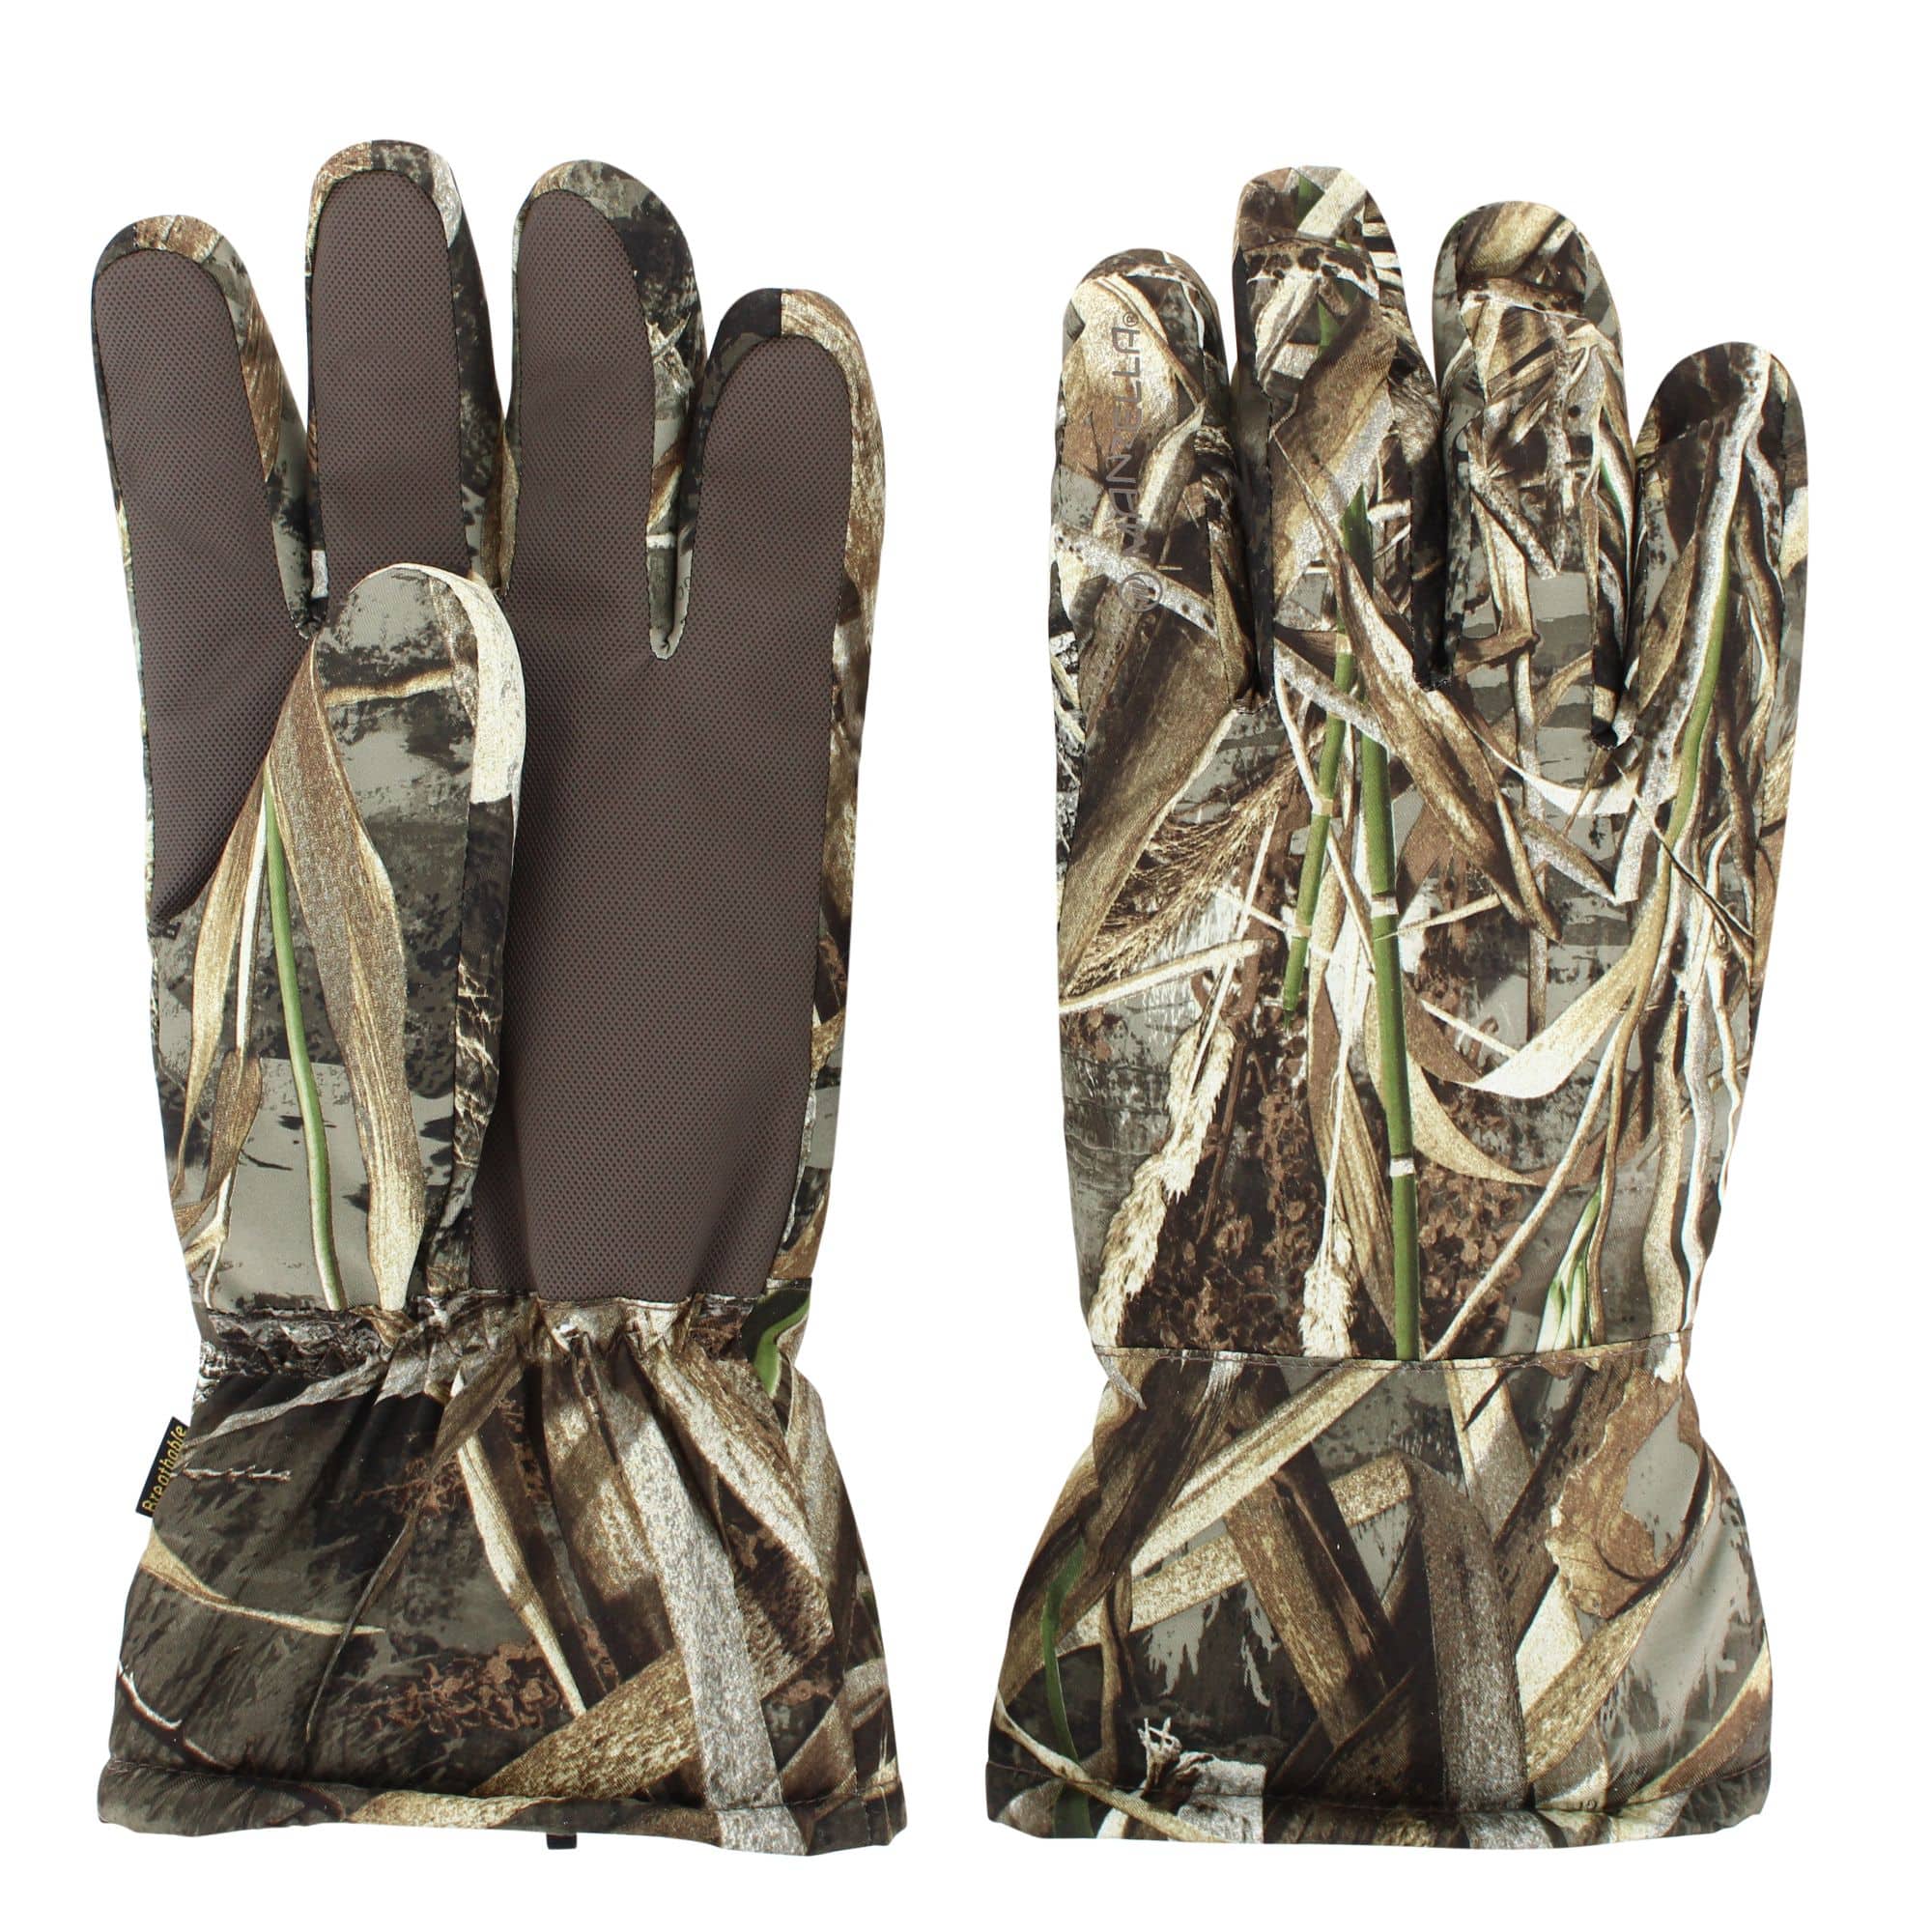 Manzella Shooter Hunting Gloves with GriP Dot Palm for Secure GriP